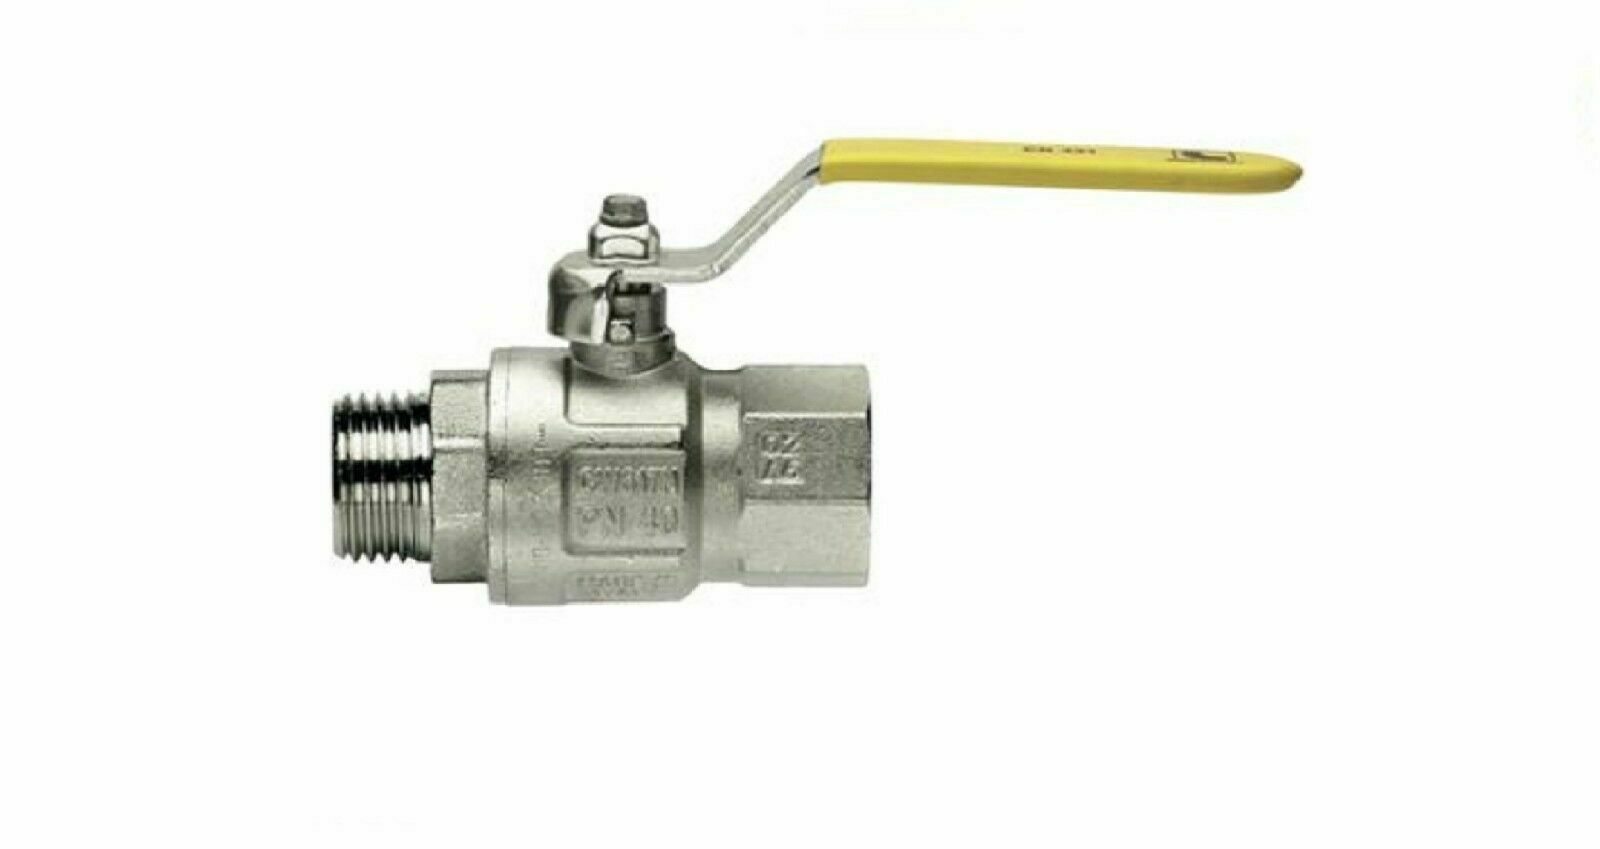 Ball Valve AGA Gas Approved 3/4" BSP (20mm) Male Female